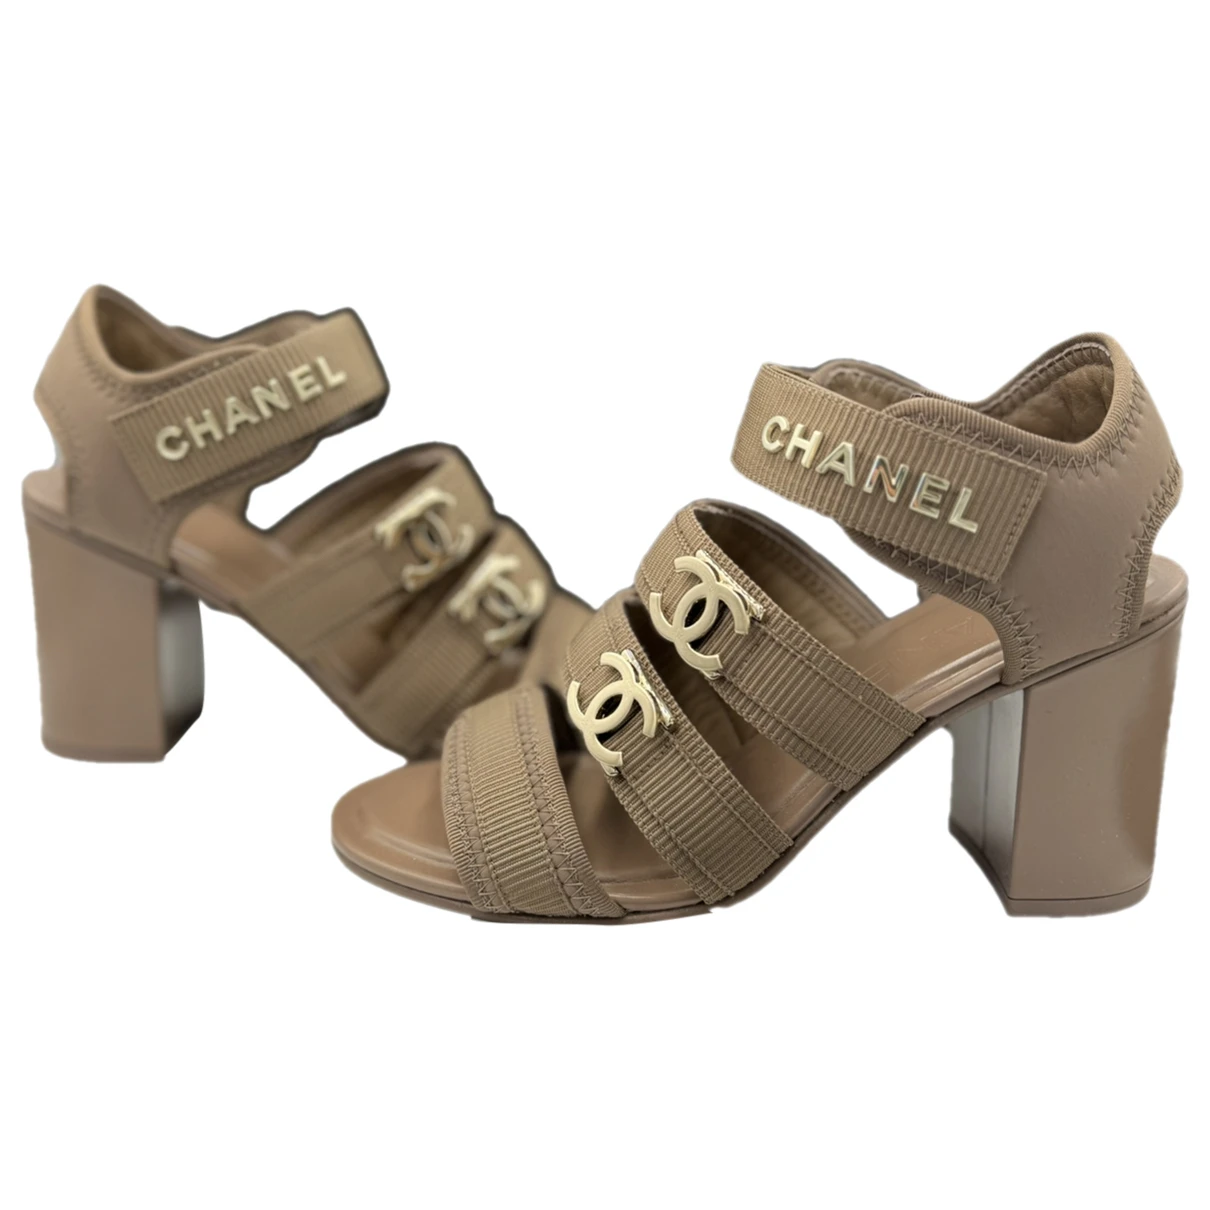 shoes Chanel sandals for Female Cloth 36 EU. Used condition